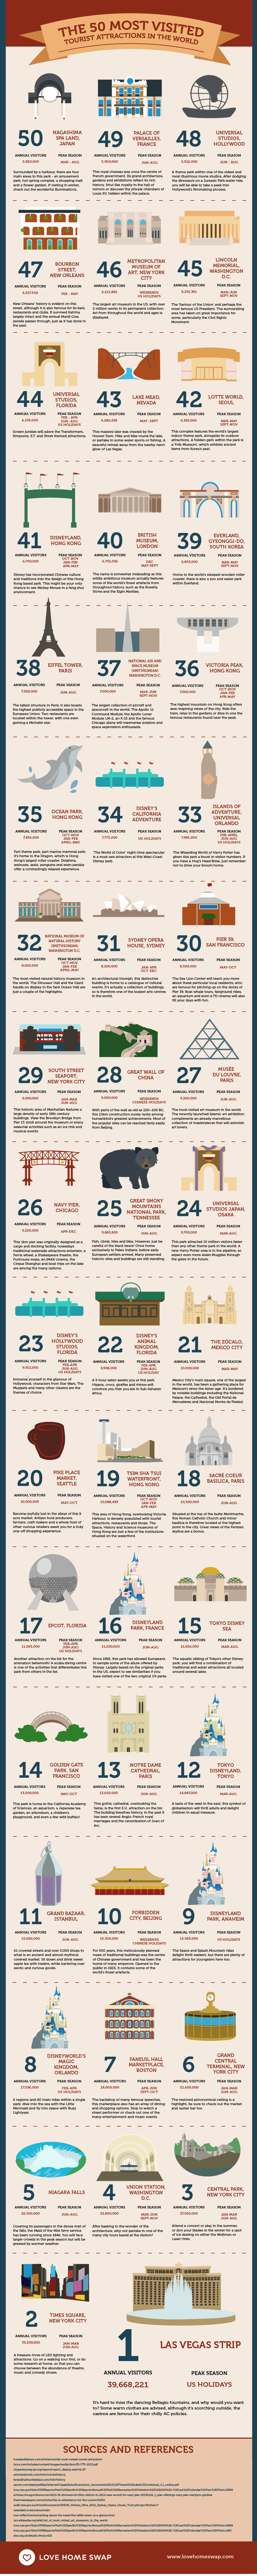 50 Most Visited Tourist Attractions in the World